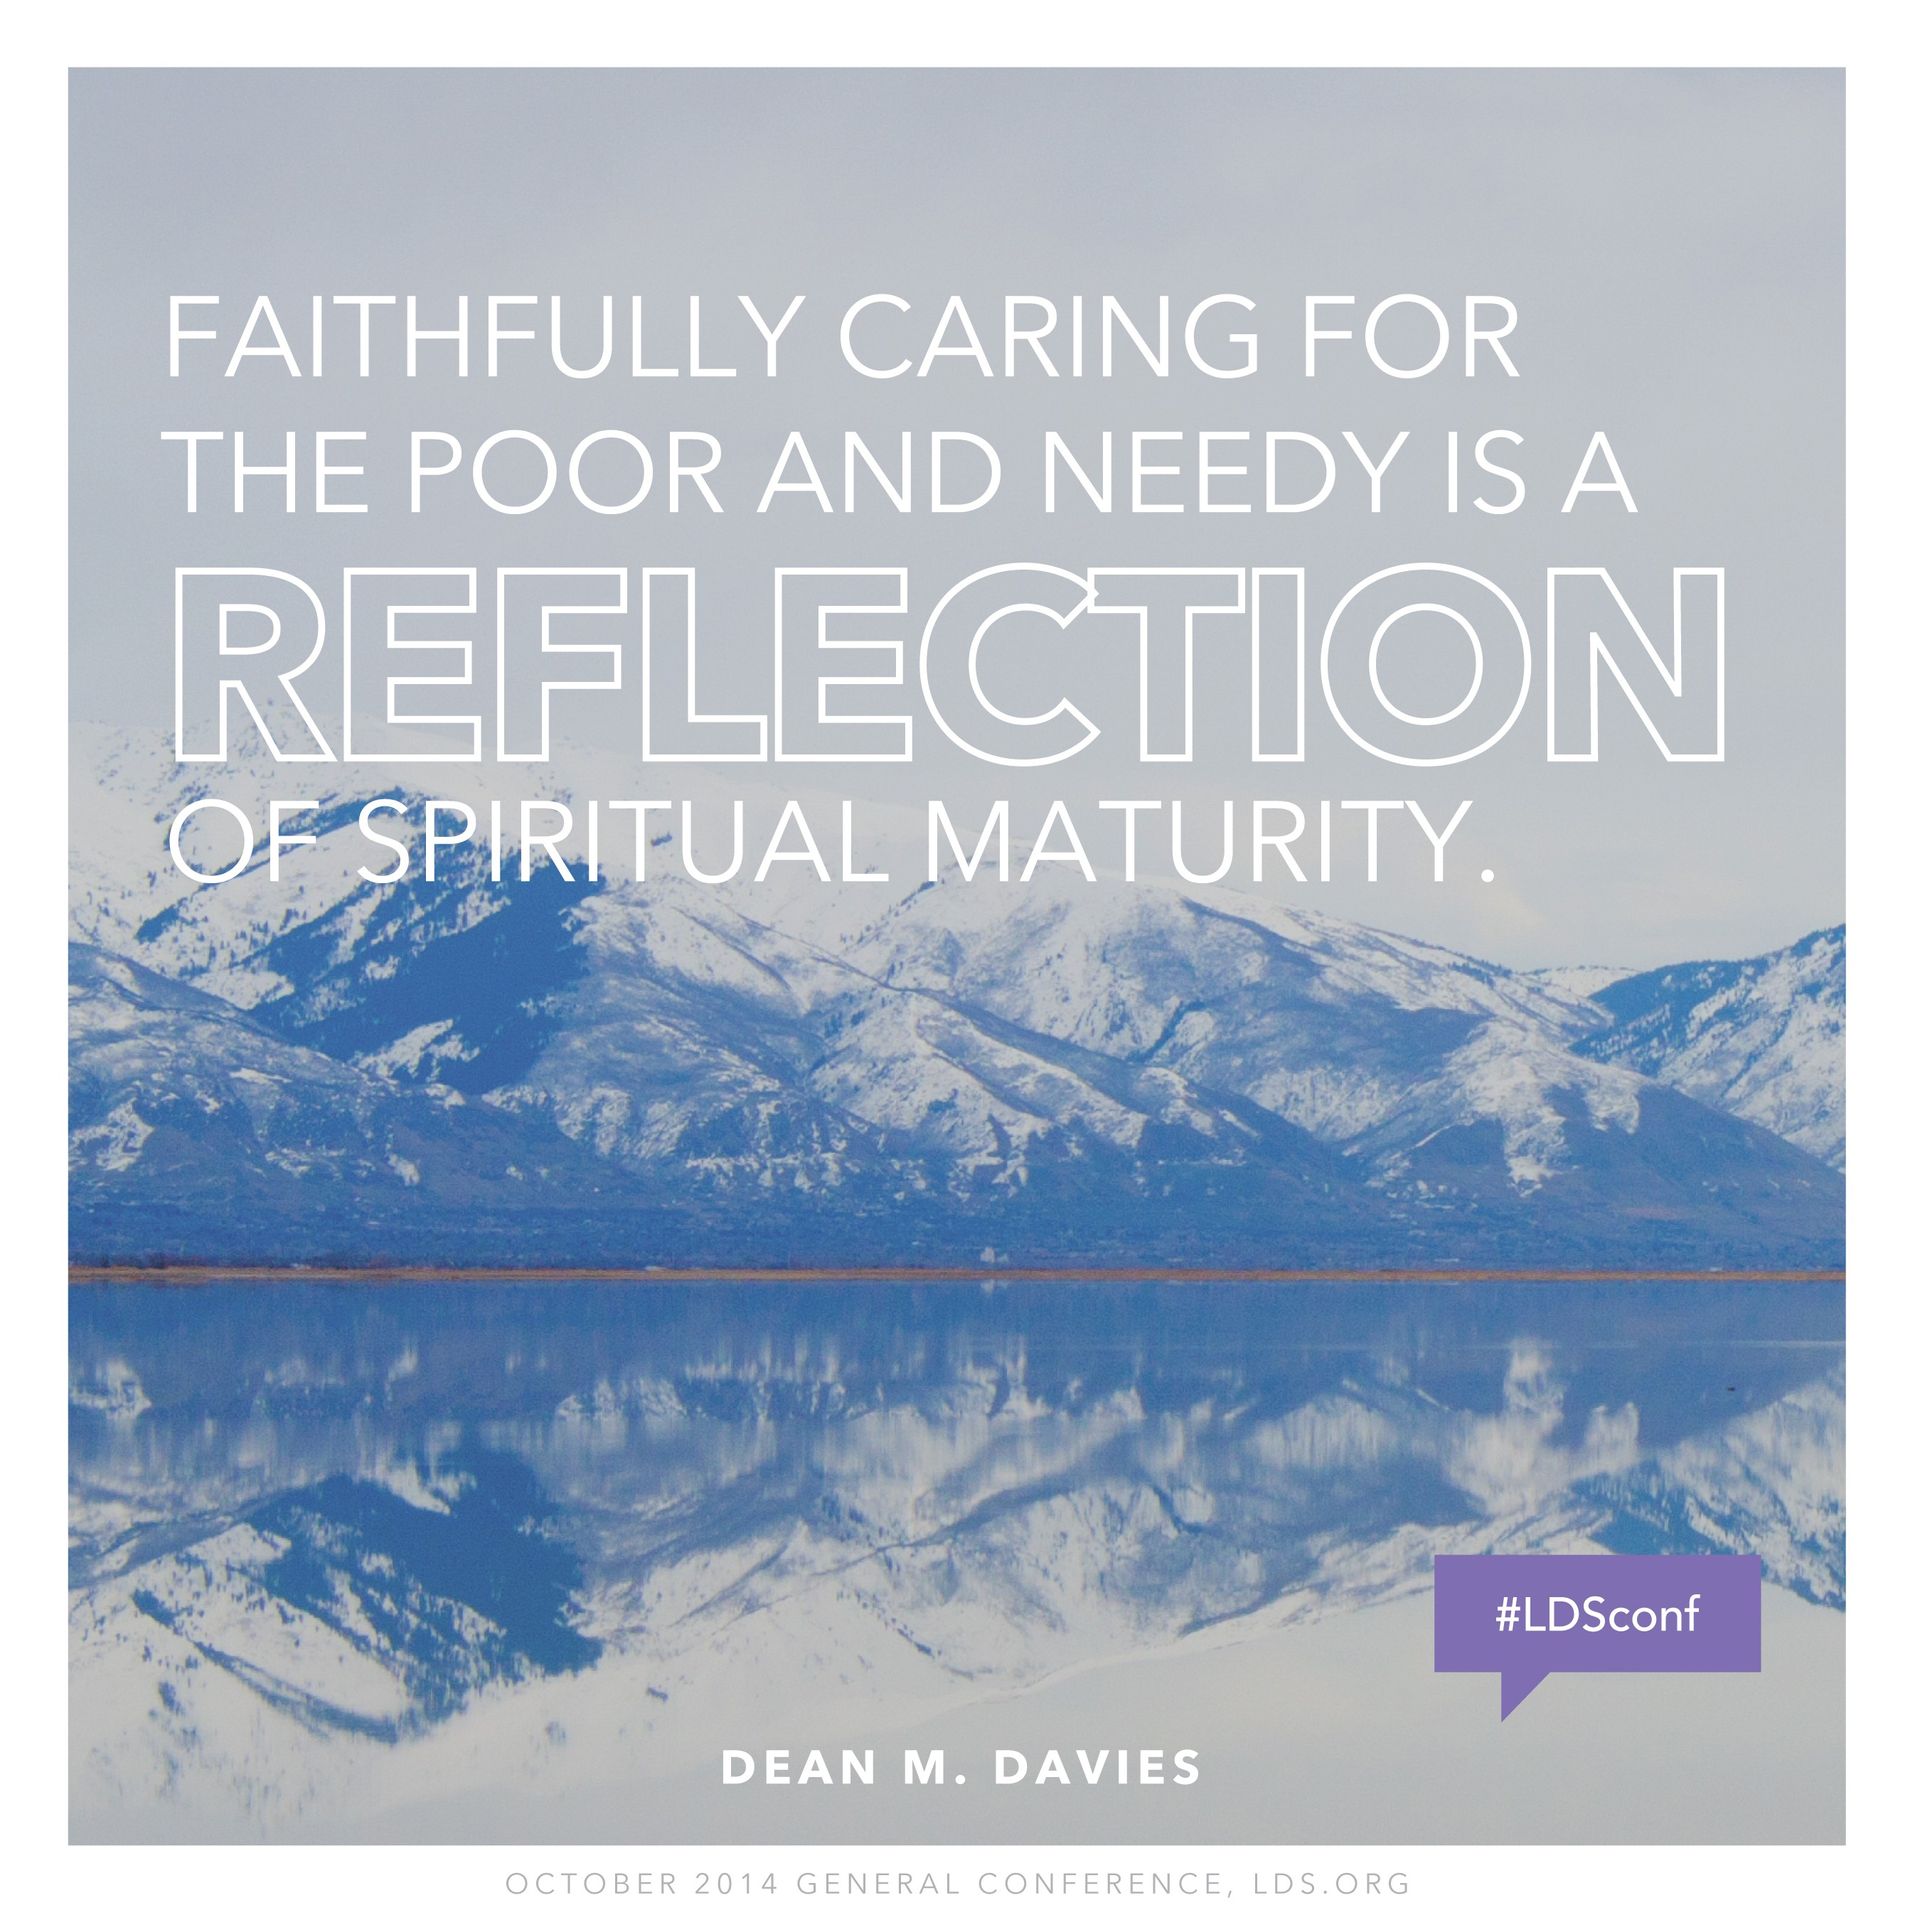 “Faithfully caring for the poor and needy is a reflection of spiritual maturity.”—Bishop Dean M. Davies, “The Law of the Fast: A Personal Responsibility to Care for the Poor and Needy” © undefined ipCode 1.